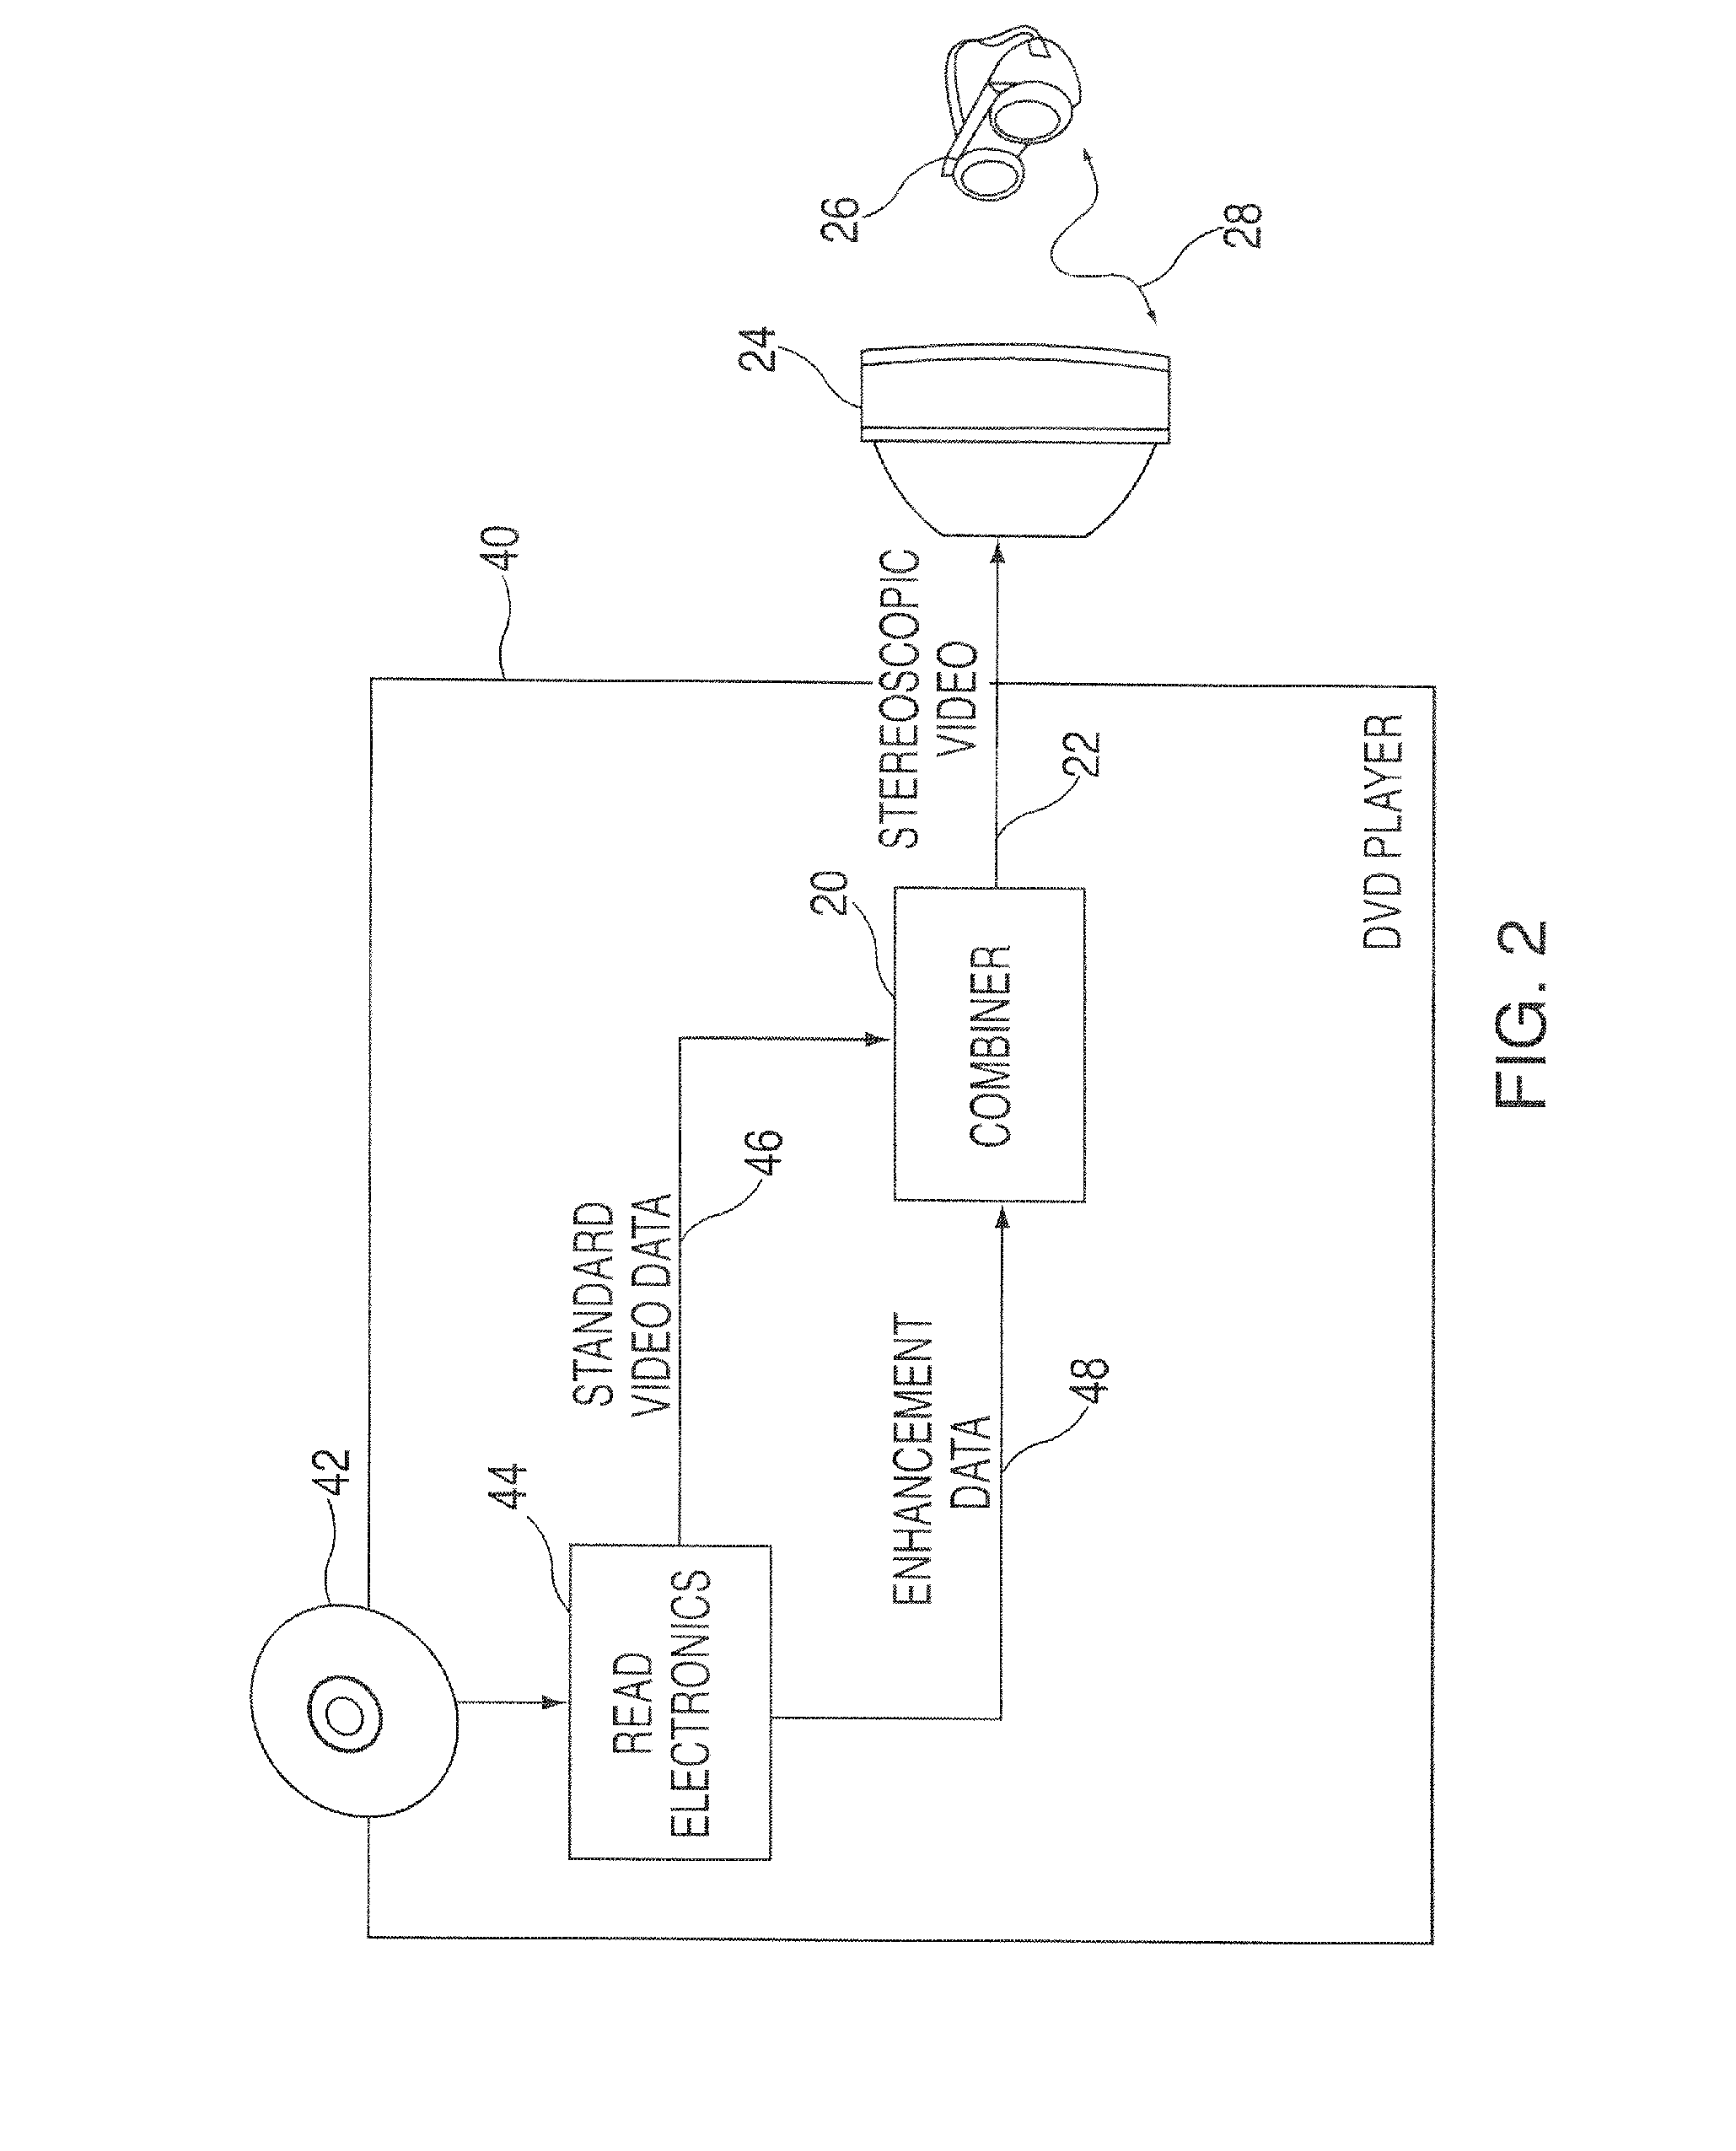 Method and apparatus for generating stereoscopic images from a DVD disc